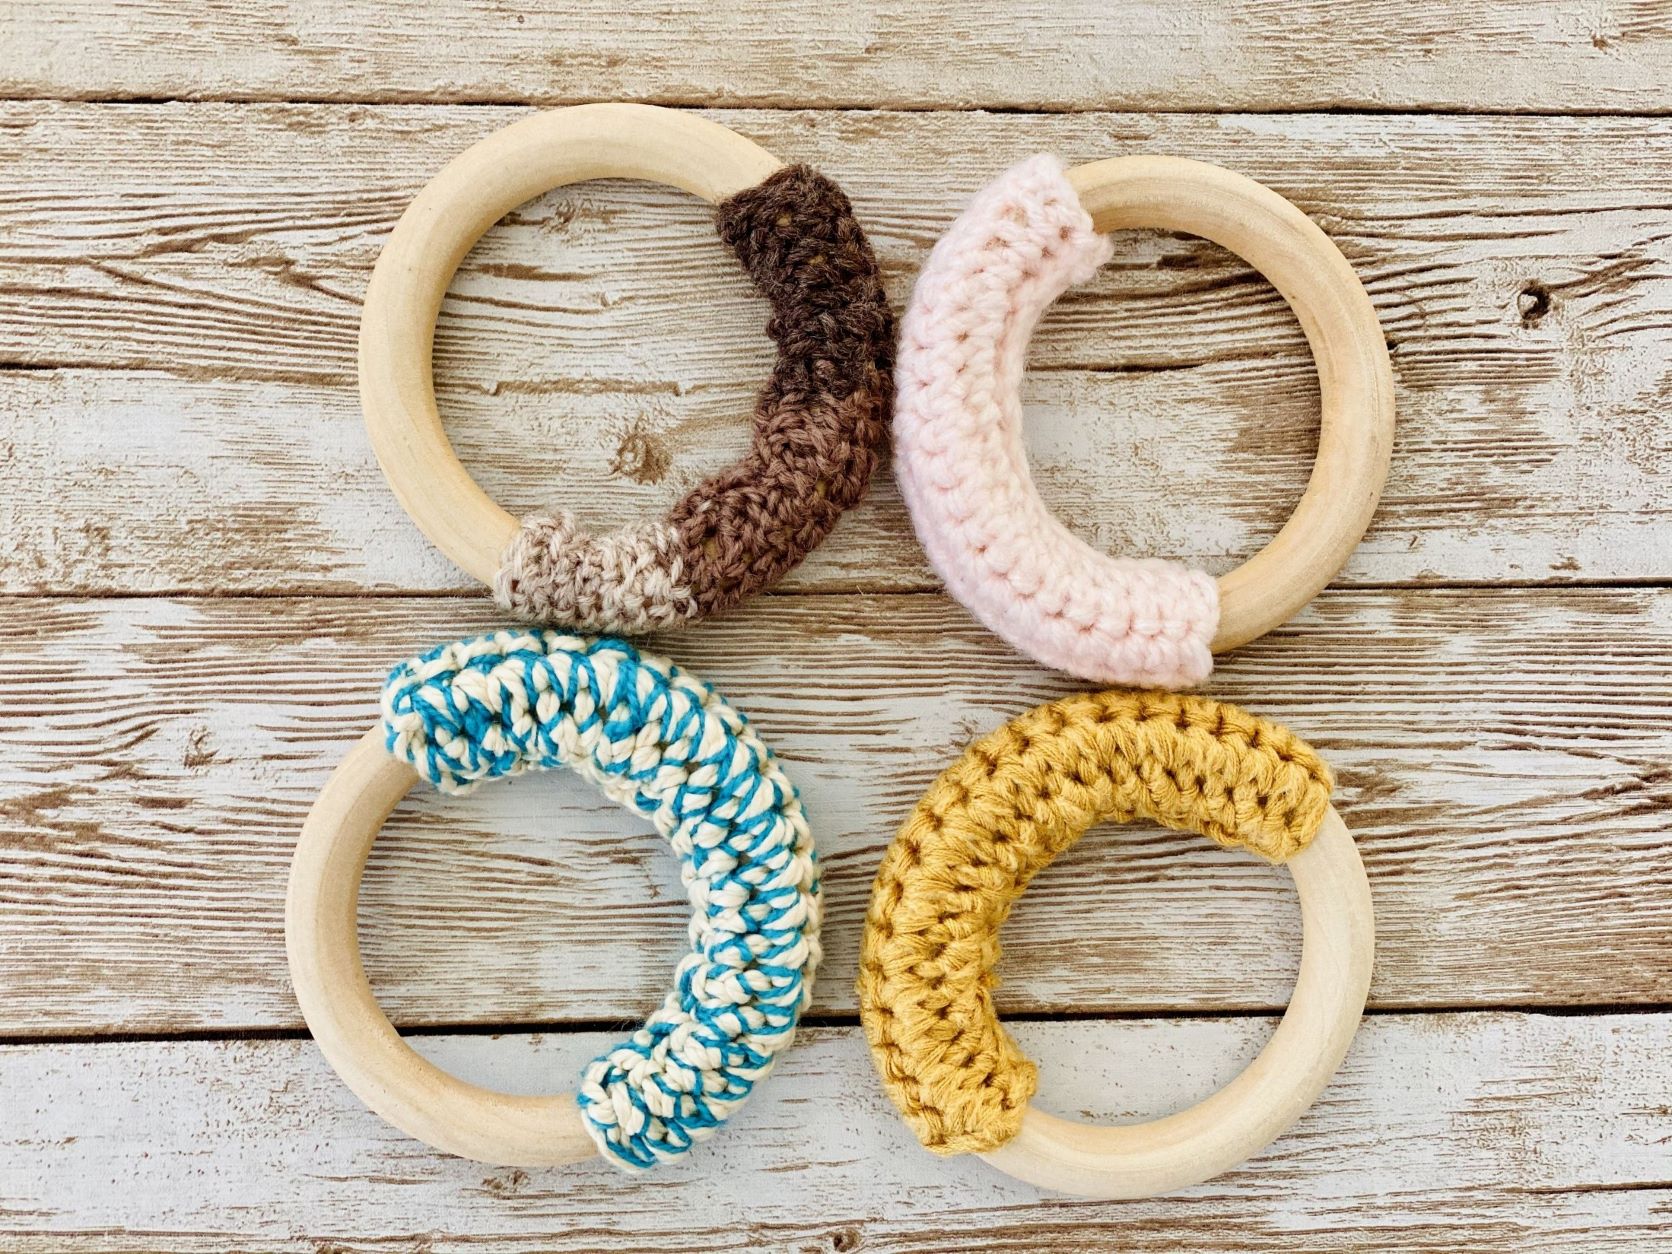 Buy Wedinard Wood Baby Teething Ring, Wooden Rings Smooth Surface Safe  Nontoxic Elegant Vintage for Children Teething(Default) Online at Low  Prices in India - Amazon.in